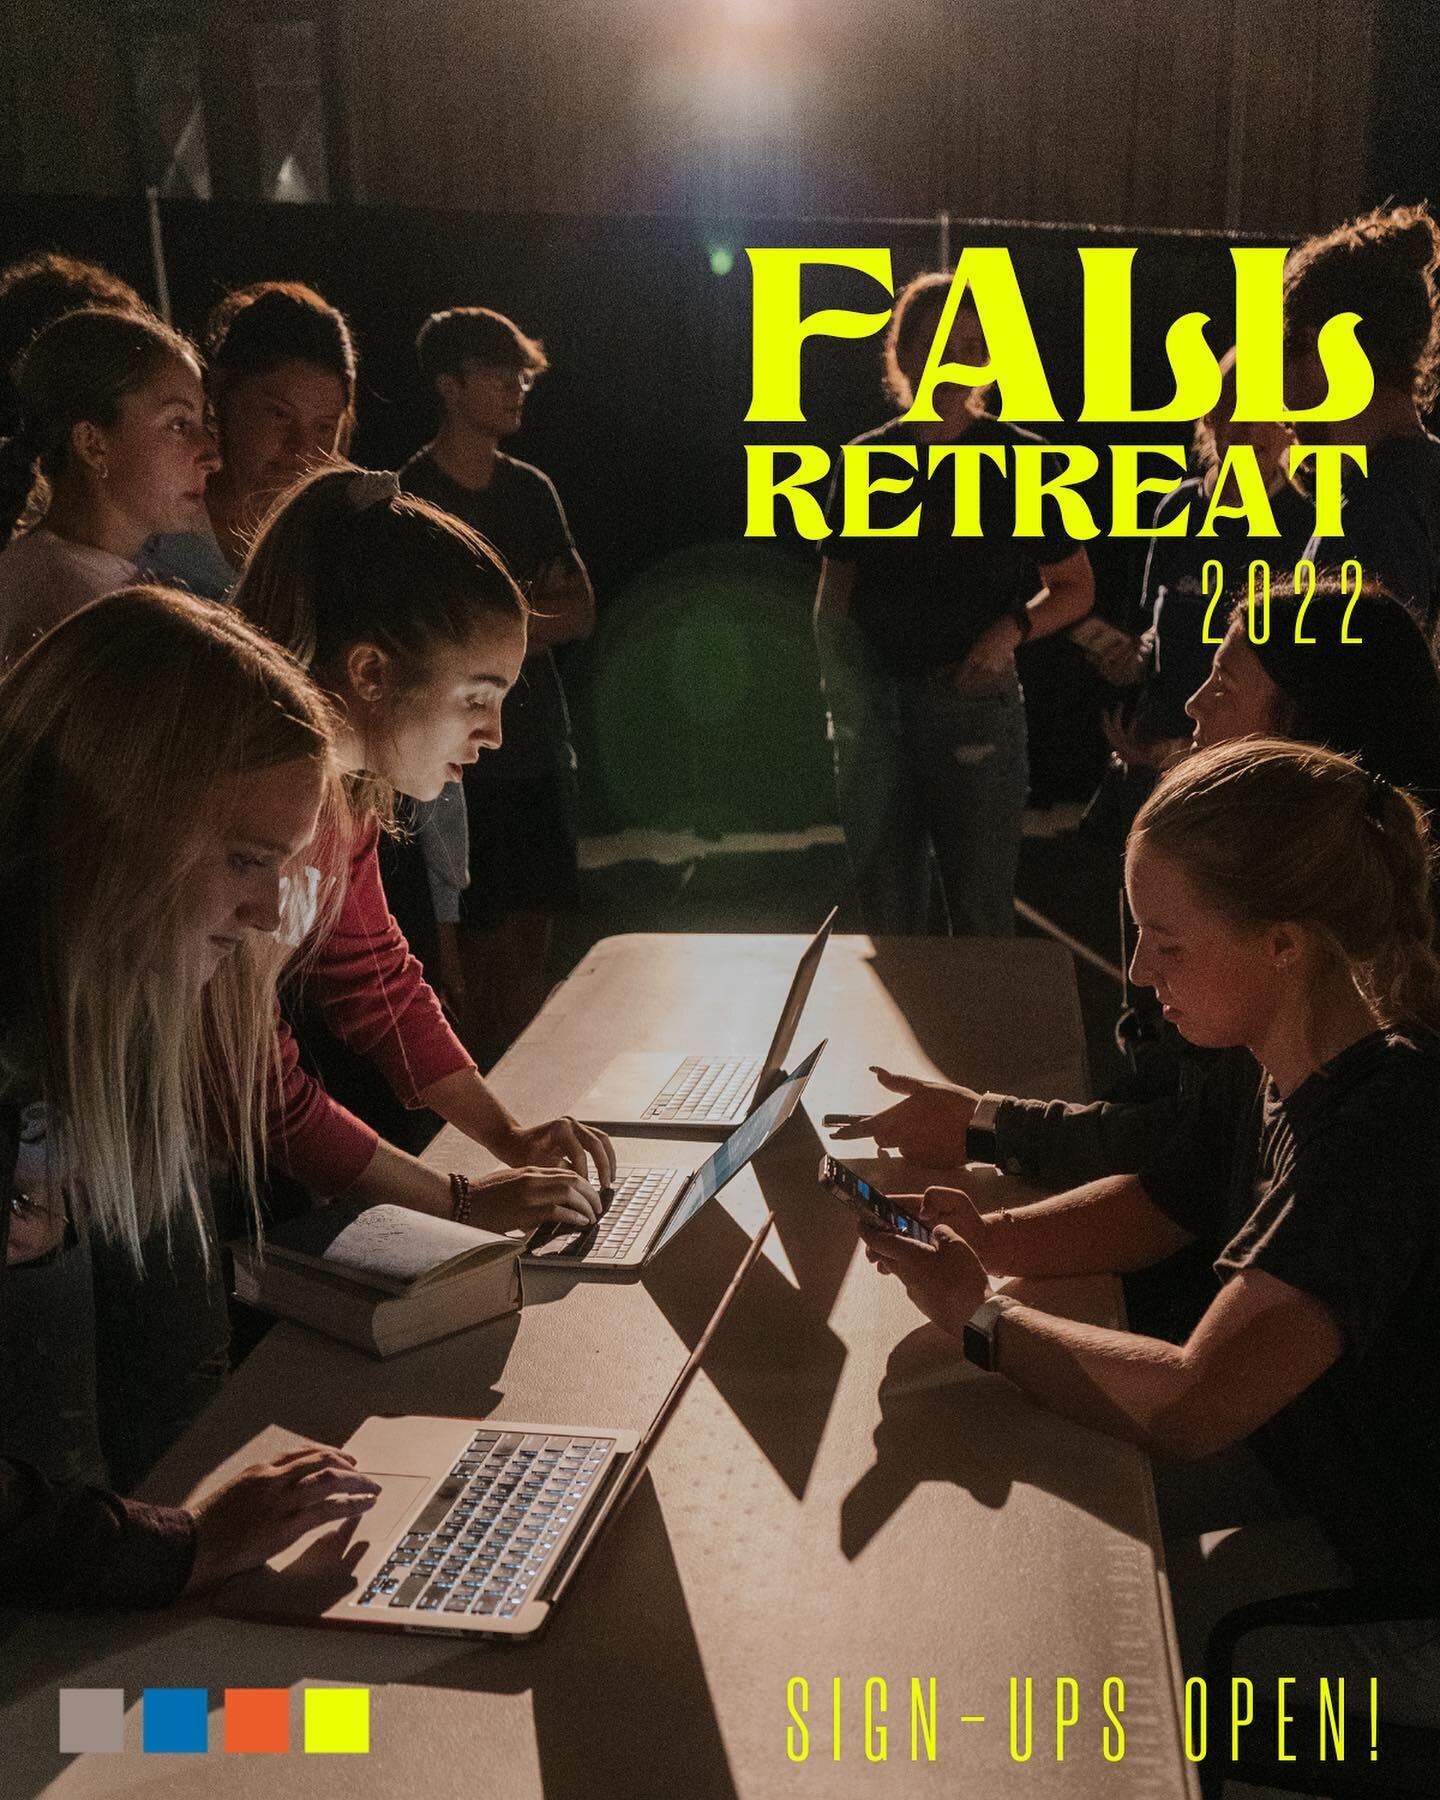 salt co fall retreat is coming up QUICK. without a doubt going to be one of the wildest weekends of the year!! you don&rsquo;t want to miss this one!

SEPT 30 - OCT 2! 

link in bio&mdash;$20 off if you sign up before Thursday. whatadeal.